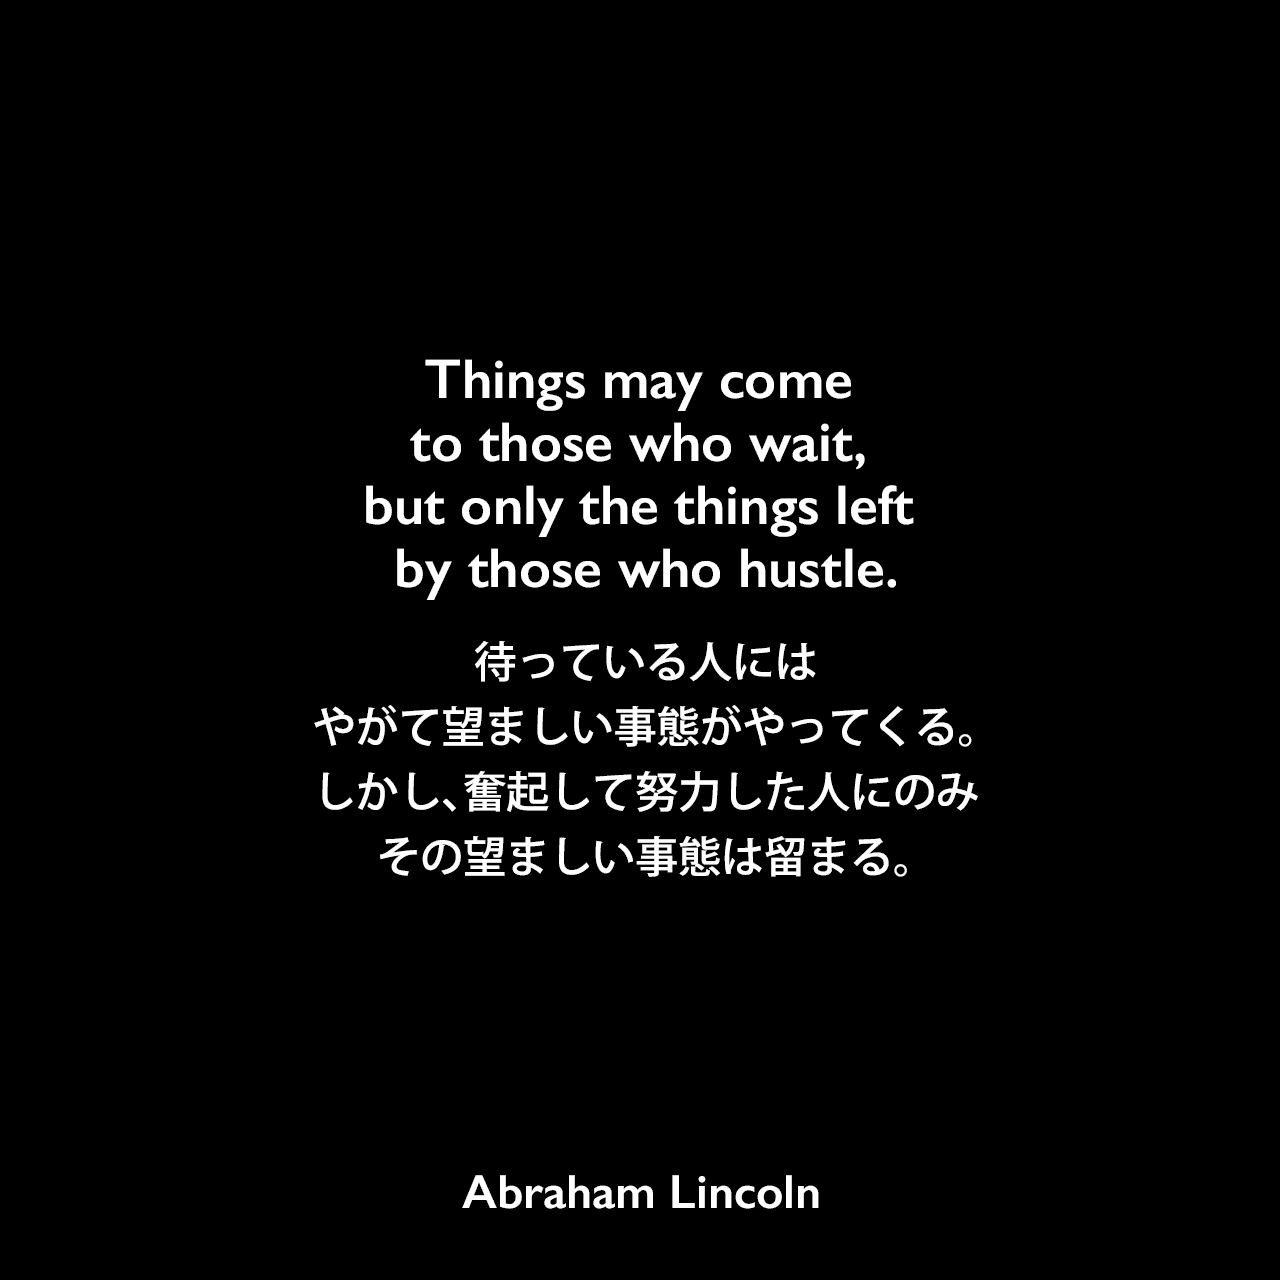 Things may come to those who wait, but only the things left by those who hustle.待っている人には、やがて望ましい事態がやってくる。しかし、奮起して努力した人にのみ、その望ましい事態は留まる。Abraham Lincoln